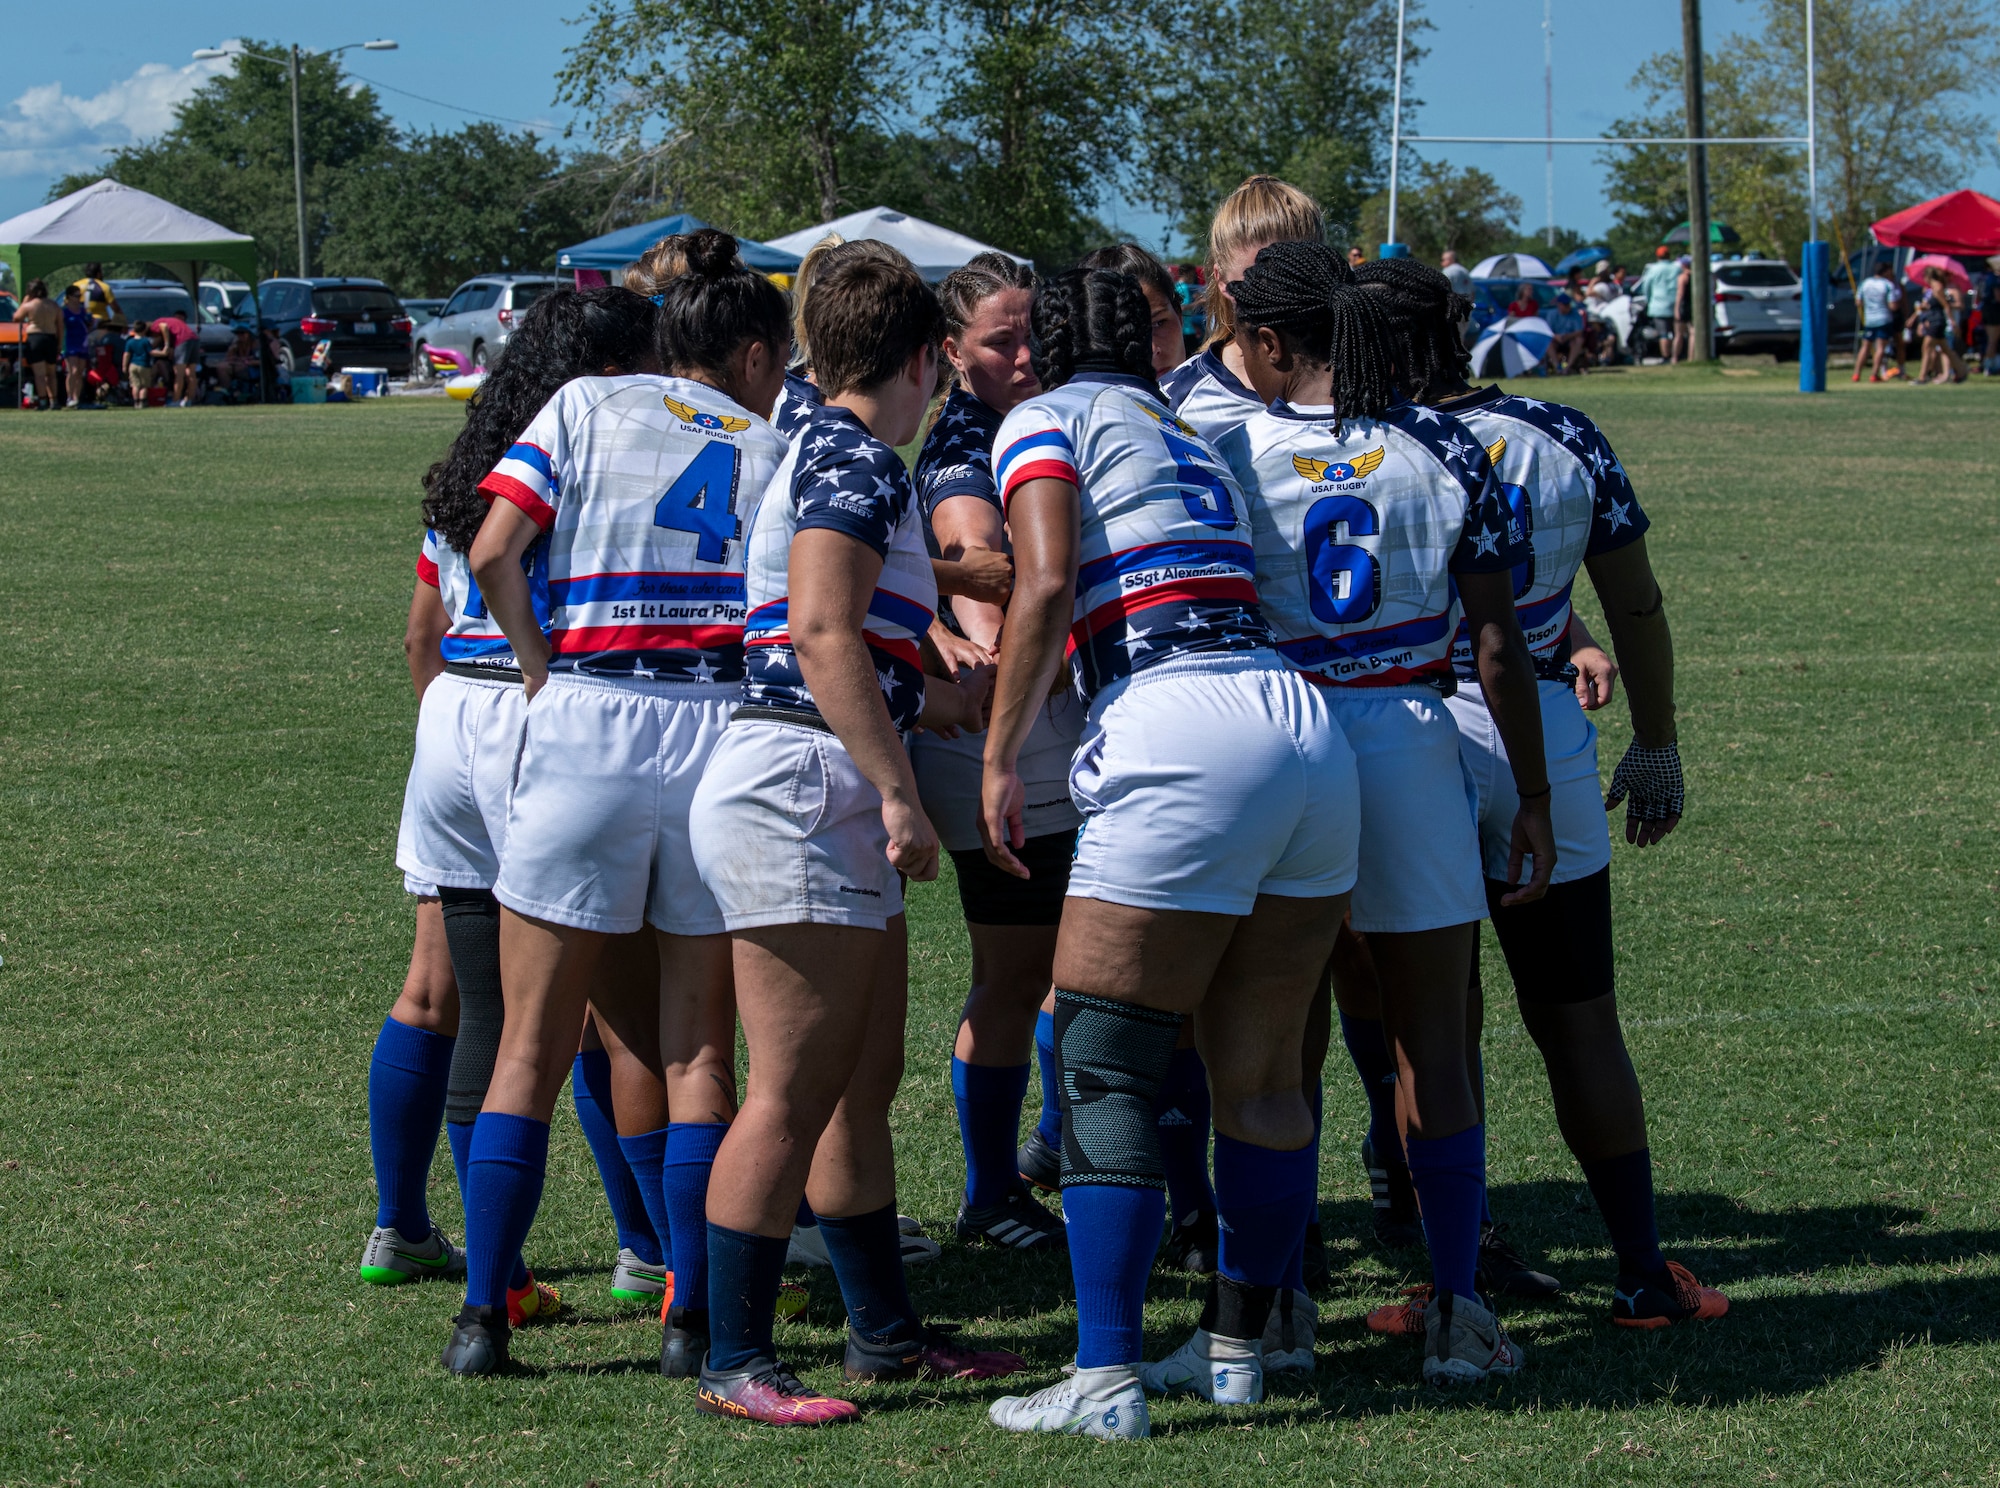 Members of the Department of Air Force Women's Rugby Team huddles before the start of a game against the Northern Virginia Rugby Team after competing in the Annual Armed Forces Women’s Rugby Championship in Wilmington, North Carolina, June 26, 2022. The competition played rugby sevens, which means every team was made up of seven players playing 7-minute halves. (U.S. Air Force photo by Airman 1st Class Sabrina Fuller)